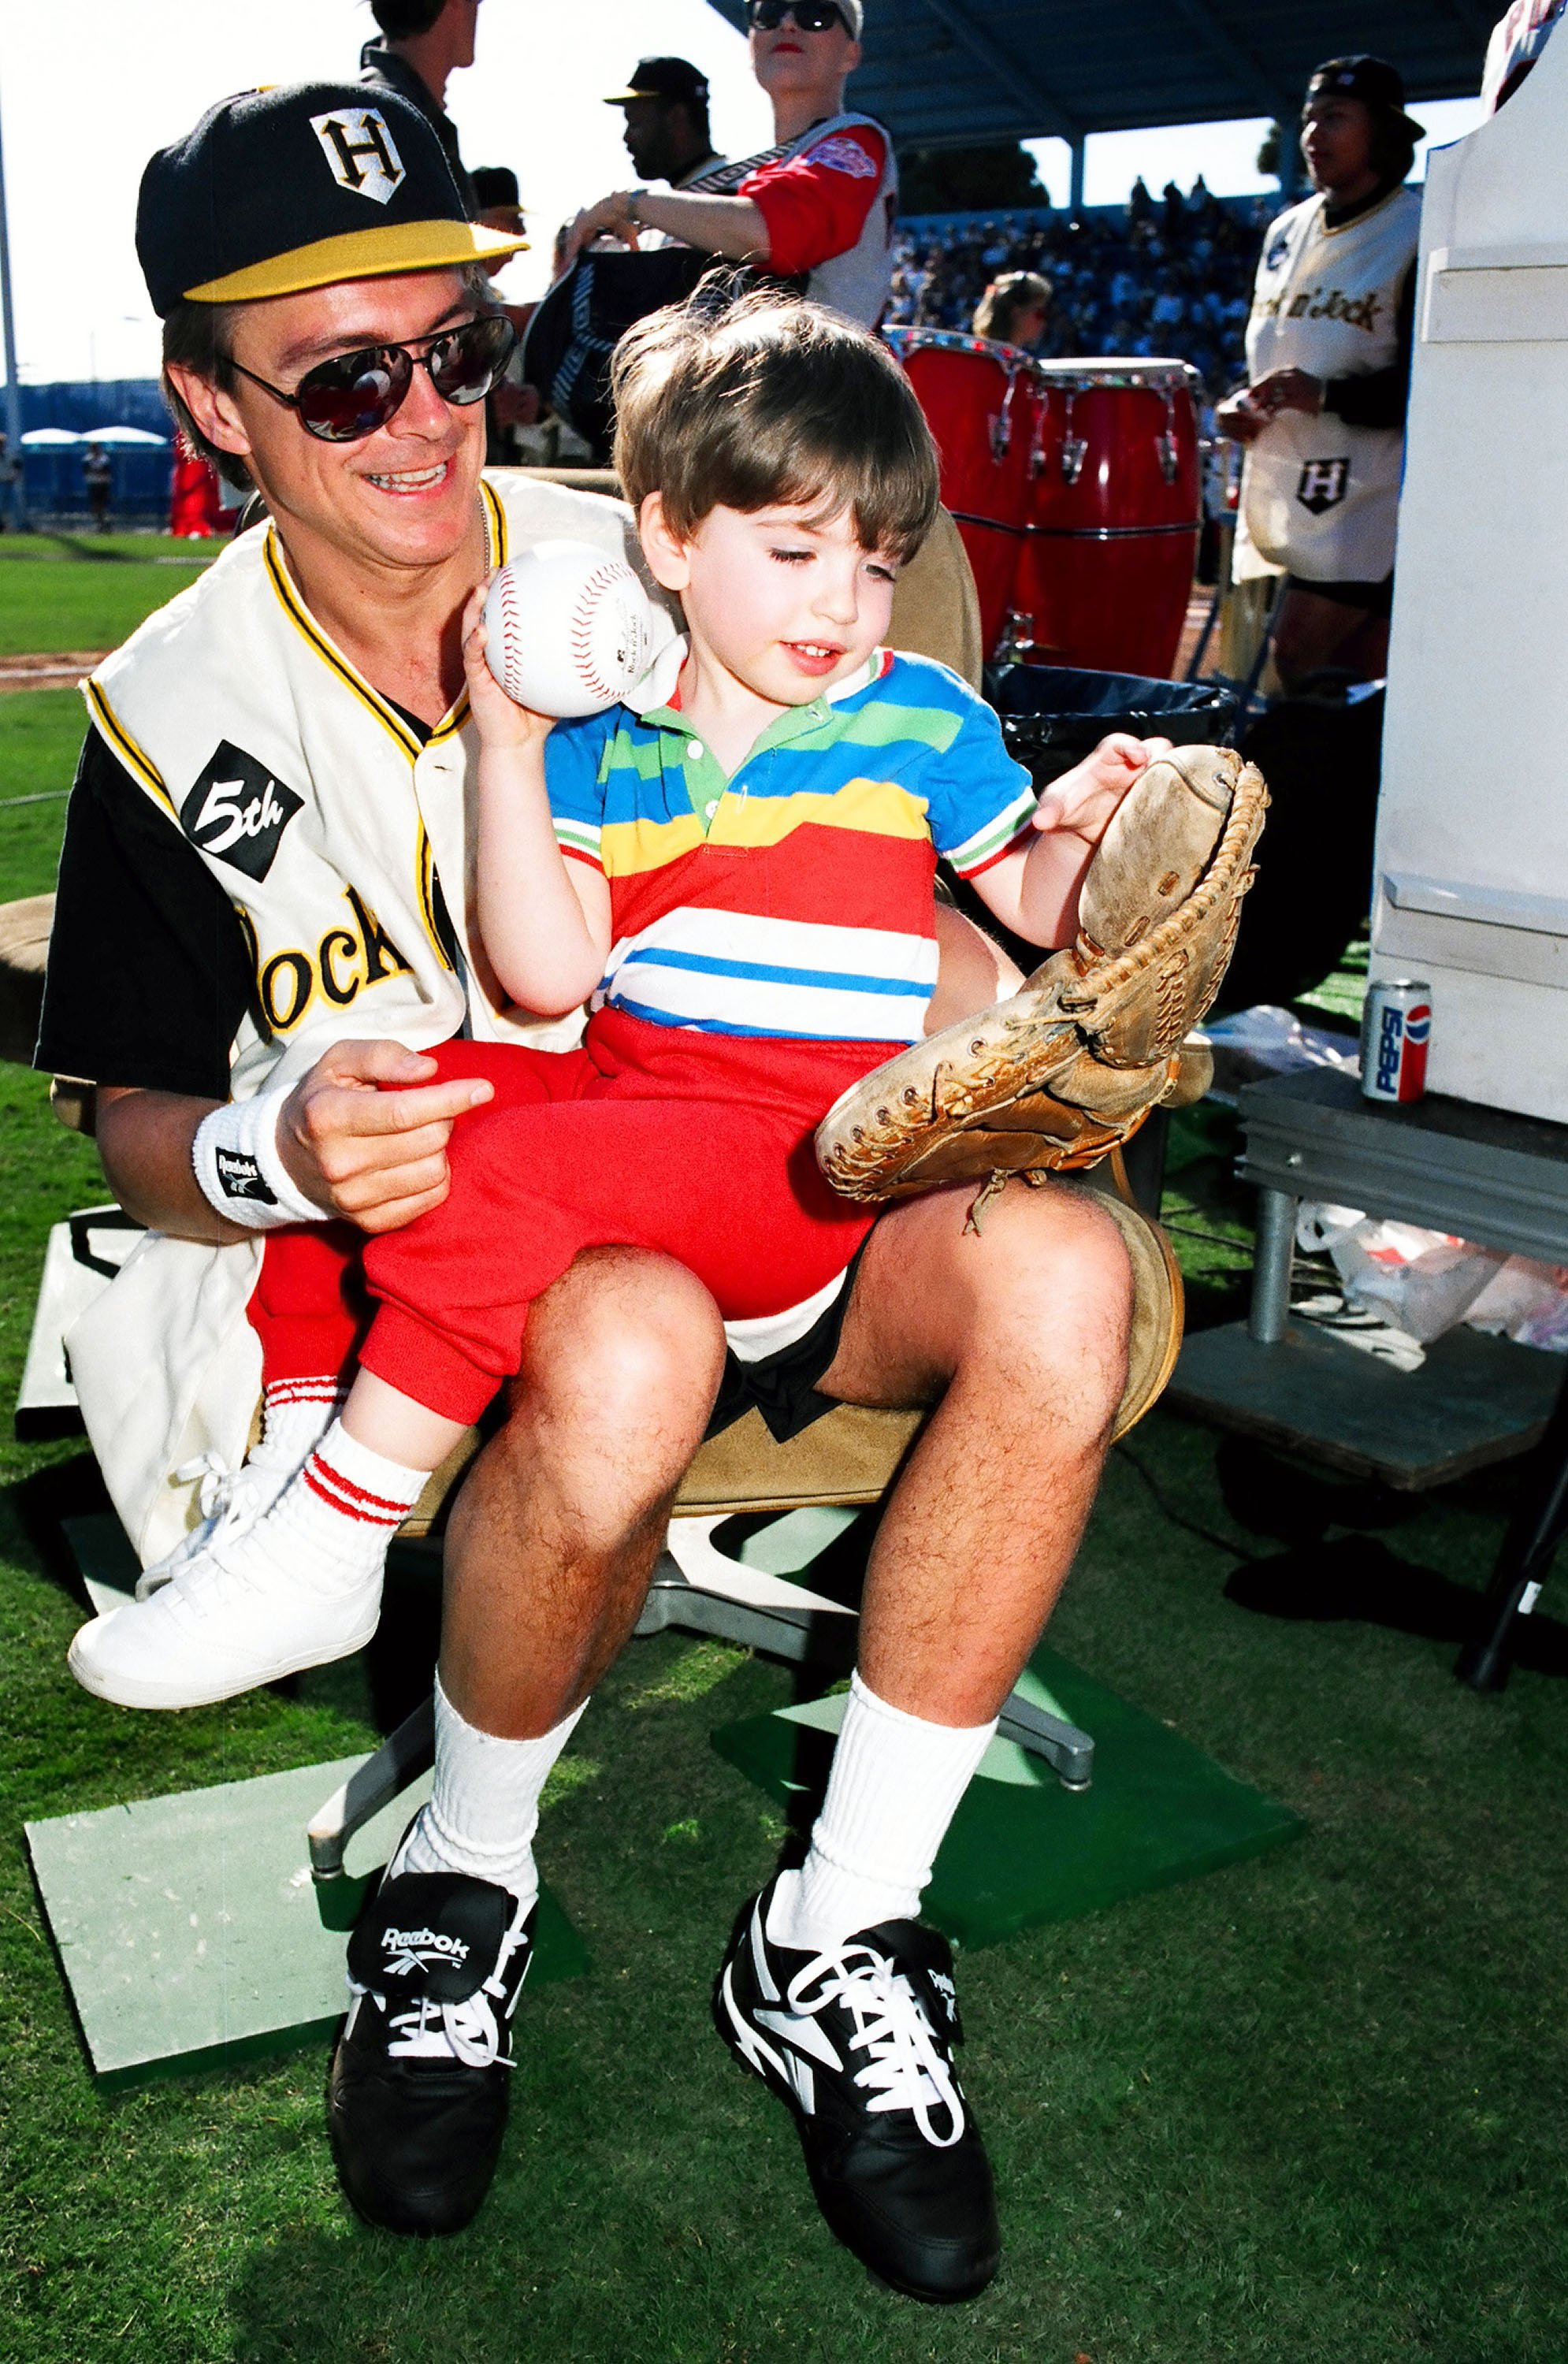 David Cassidy and his son Beau Cassidy pictured at MTV's 3rd Annual Rock 'n Jock Softball at Memorial Park, 1992, Long Beach, California. | Photo: Getty Images